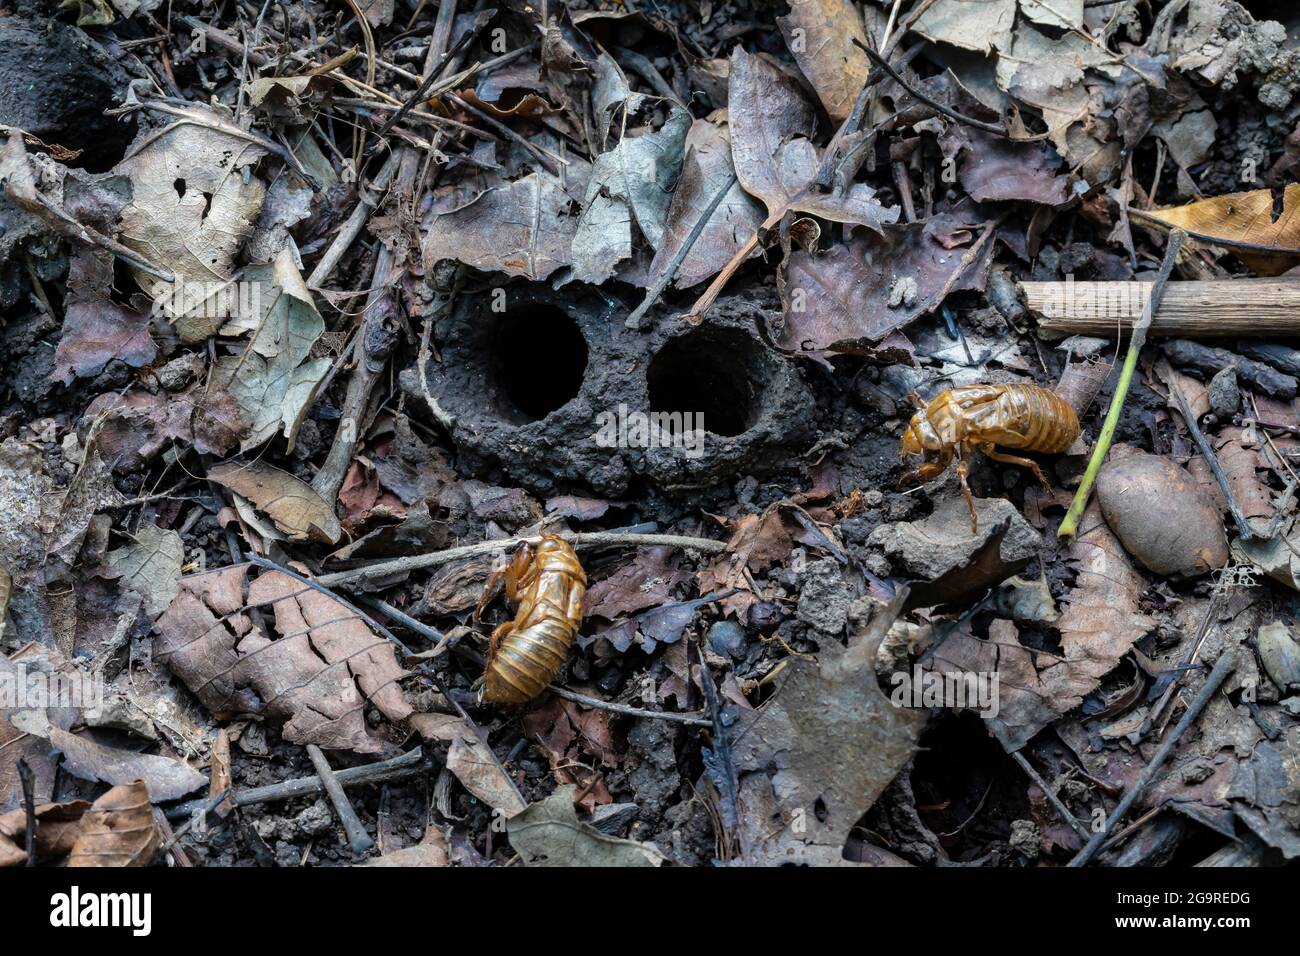 Emergence holes of the larvae, with exoskeleton, of Brood X, a 17-year Cicada, Magicicada sp., emerged in June 2021 in Cherry Hill Nature Preserve nea Stock Photo